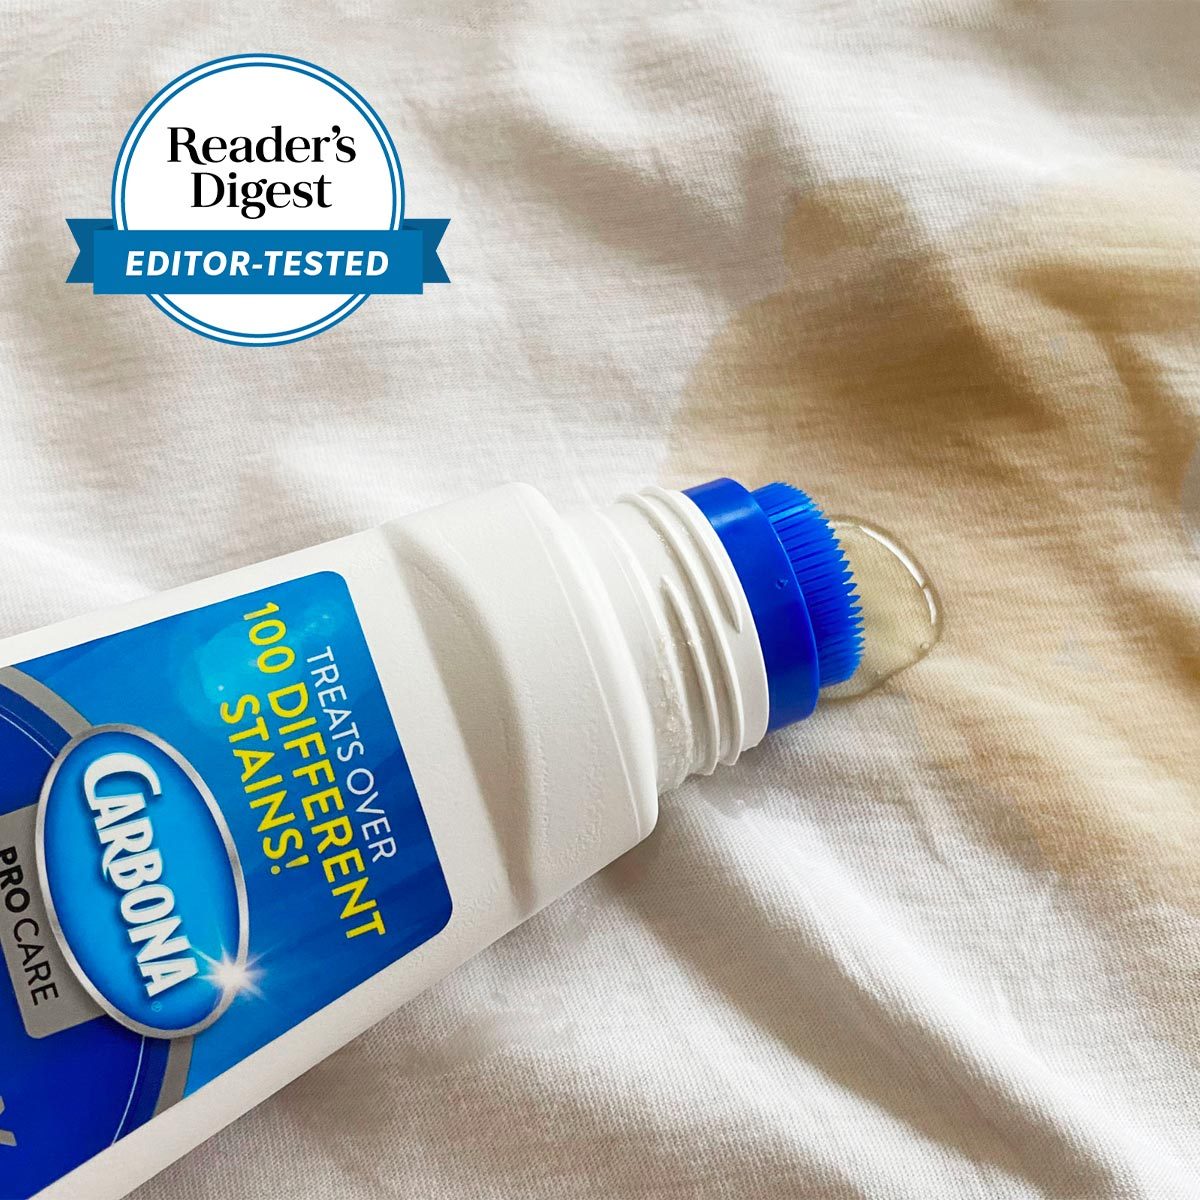 Carbona Laundry Stain Scrubber Review: The Best Stain Remover